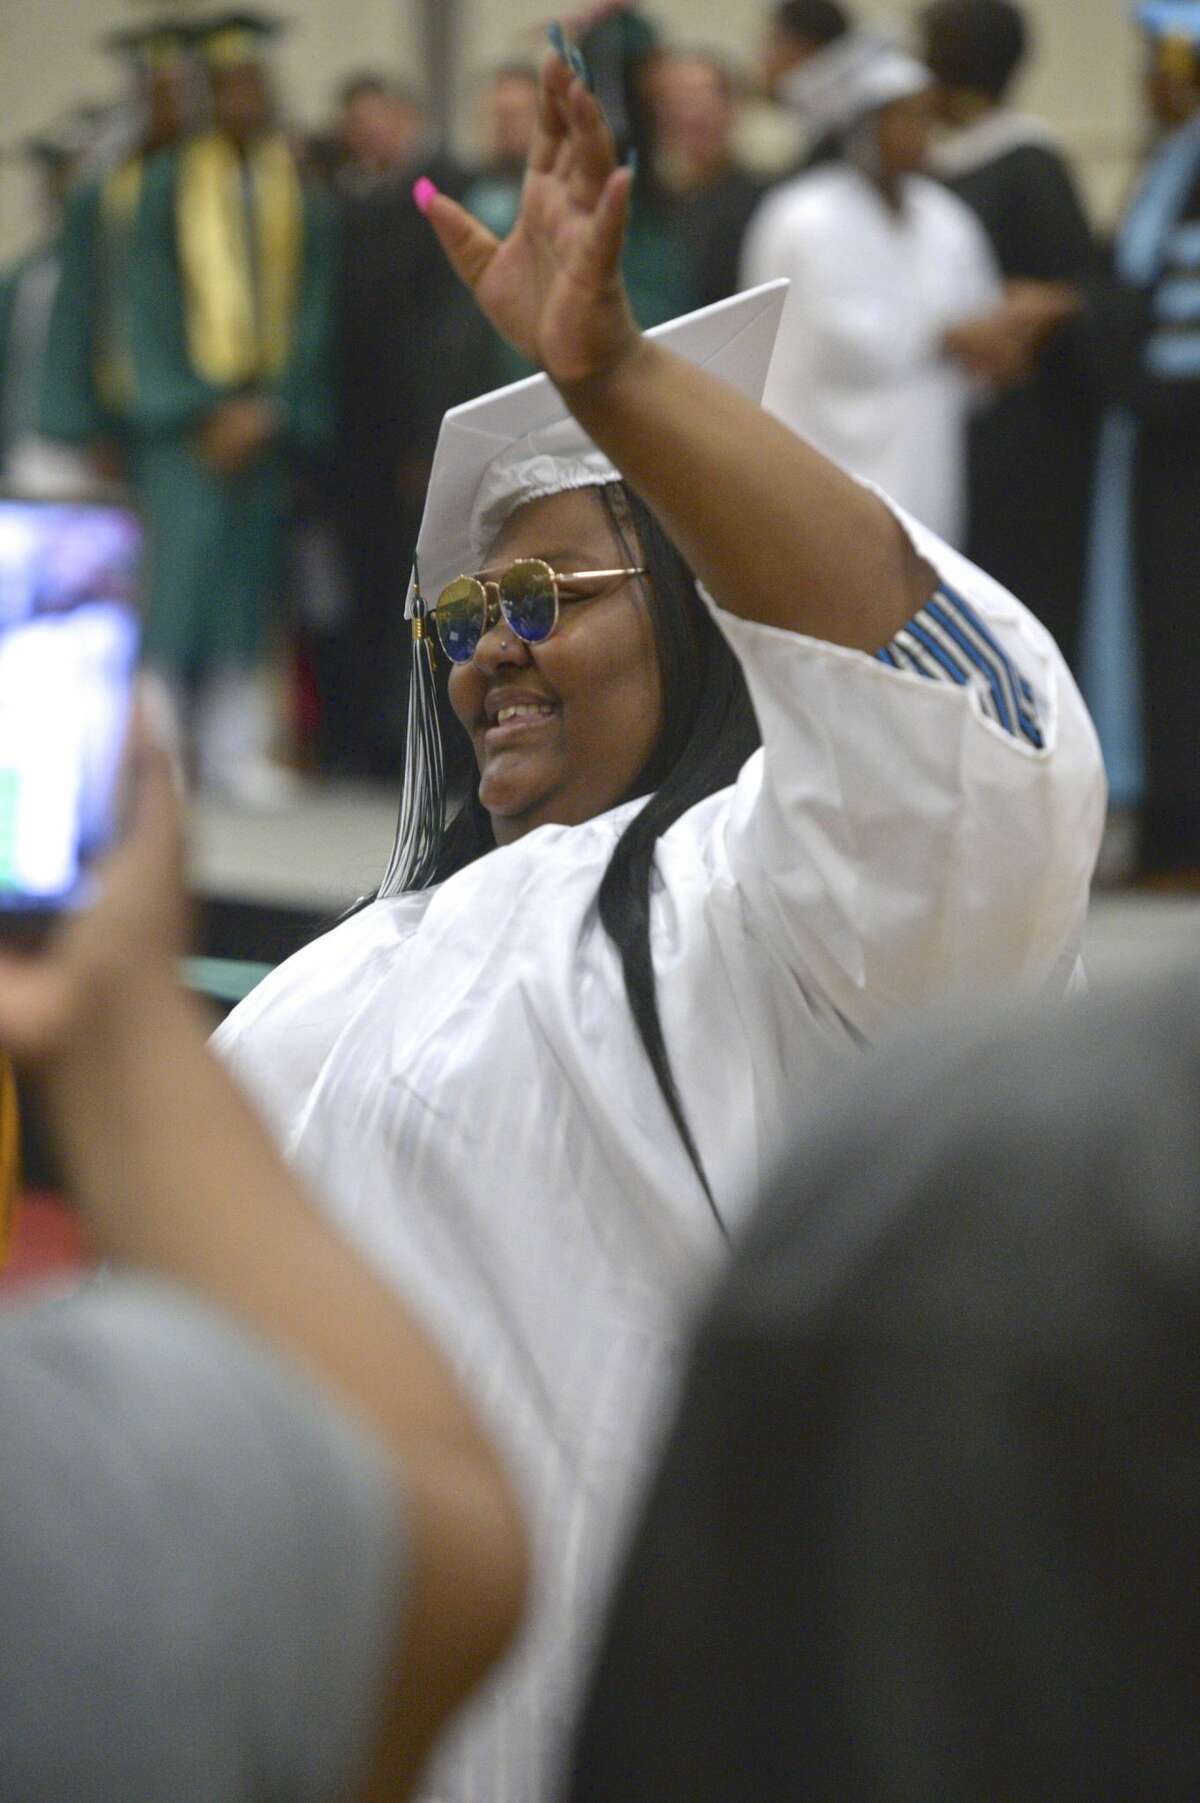 The Class of 2019 Bassick High School Commencement Exercise, Tuesday, June 18, 2019, at Central High School, Bridgeport, Conn.